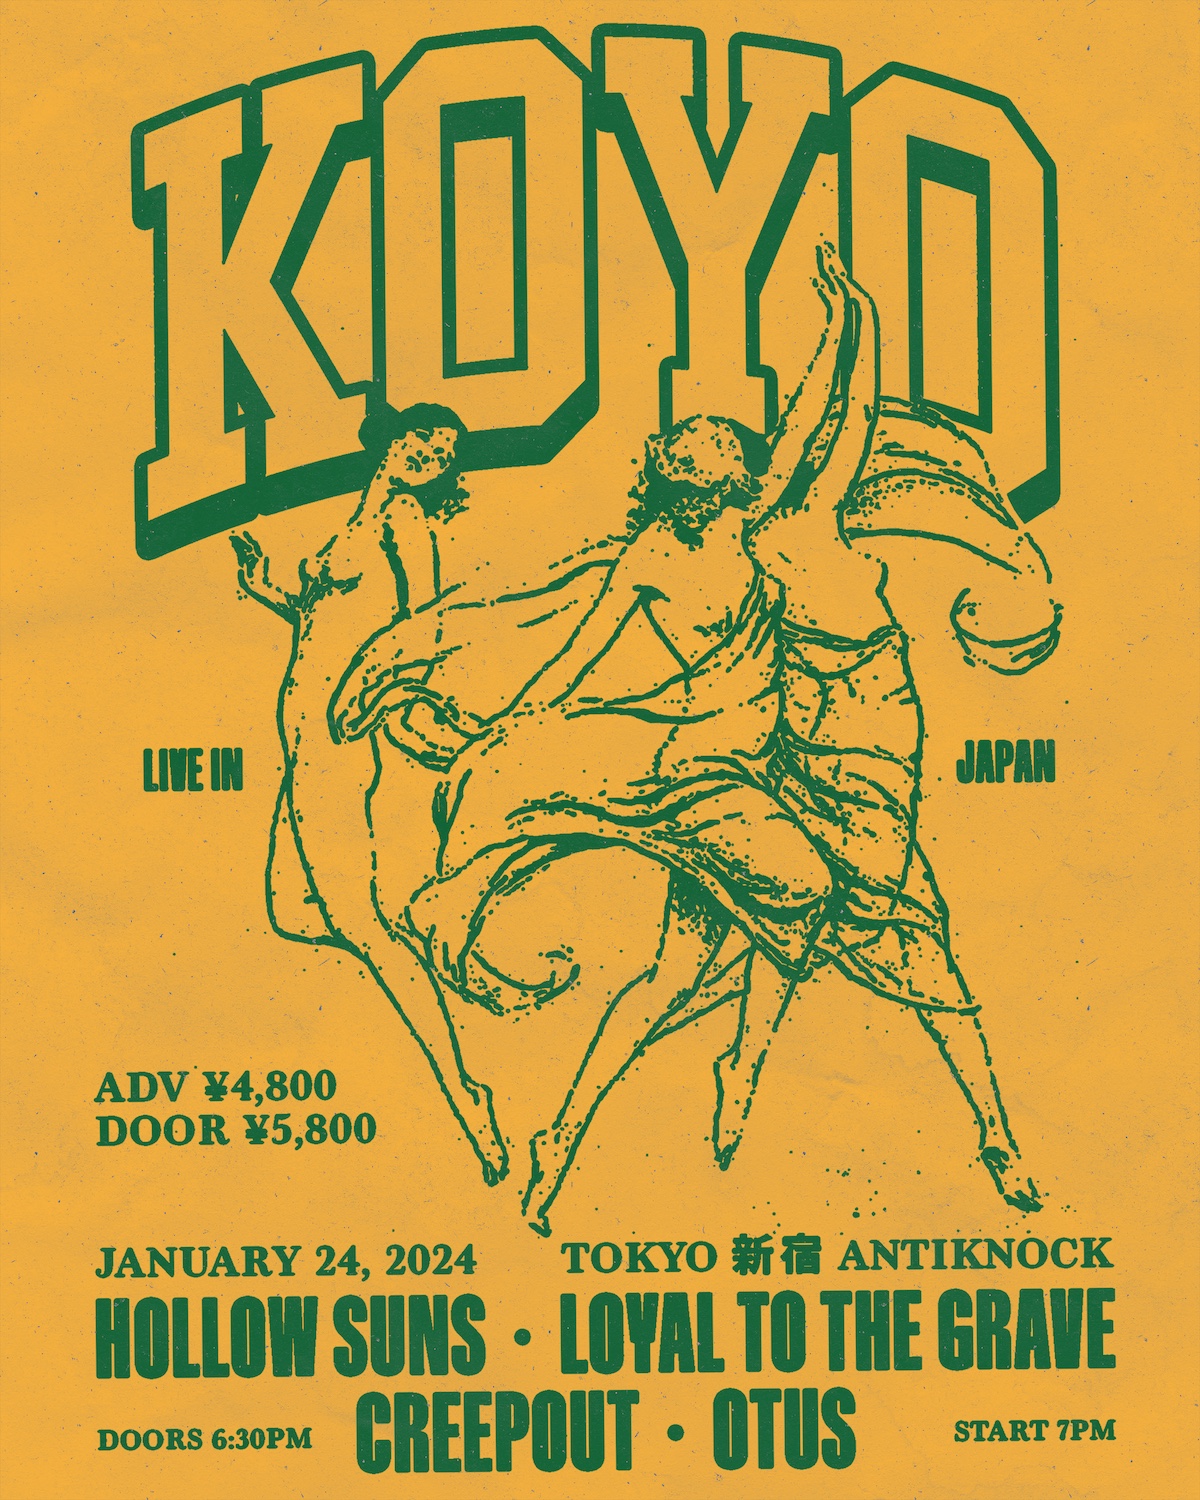 Koyo – ‘Live in Japan’ support bands